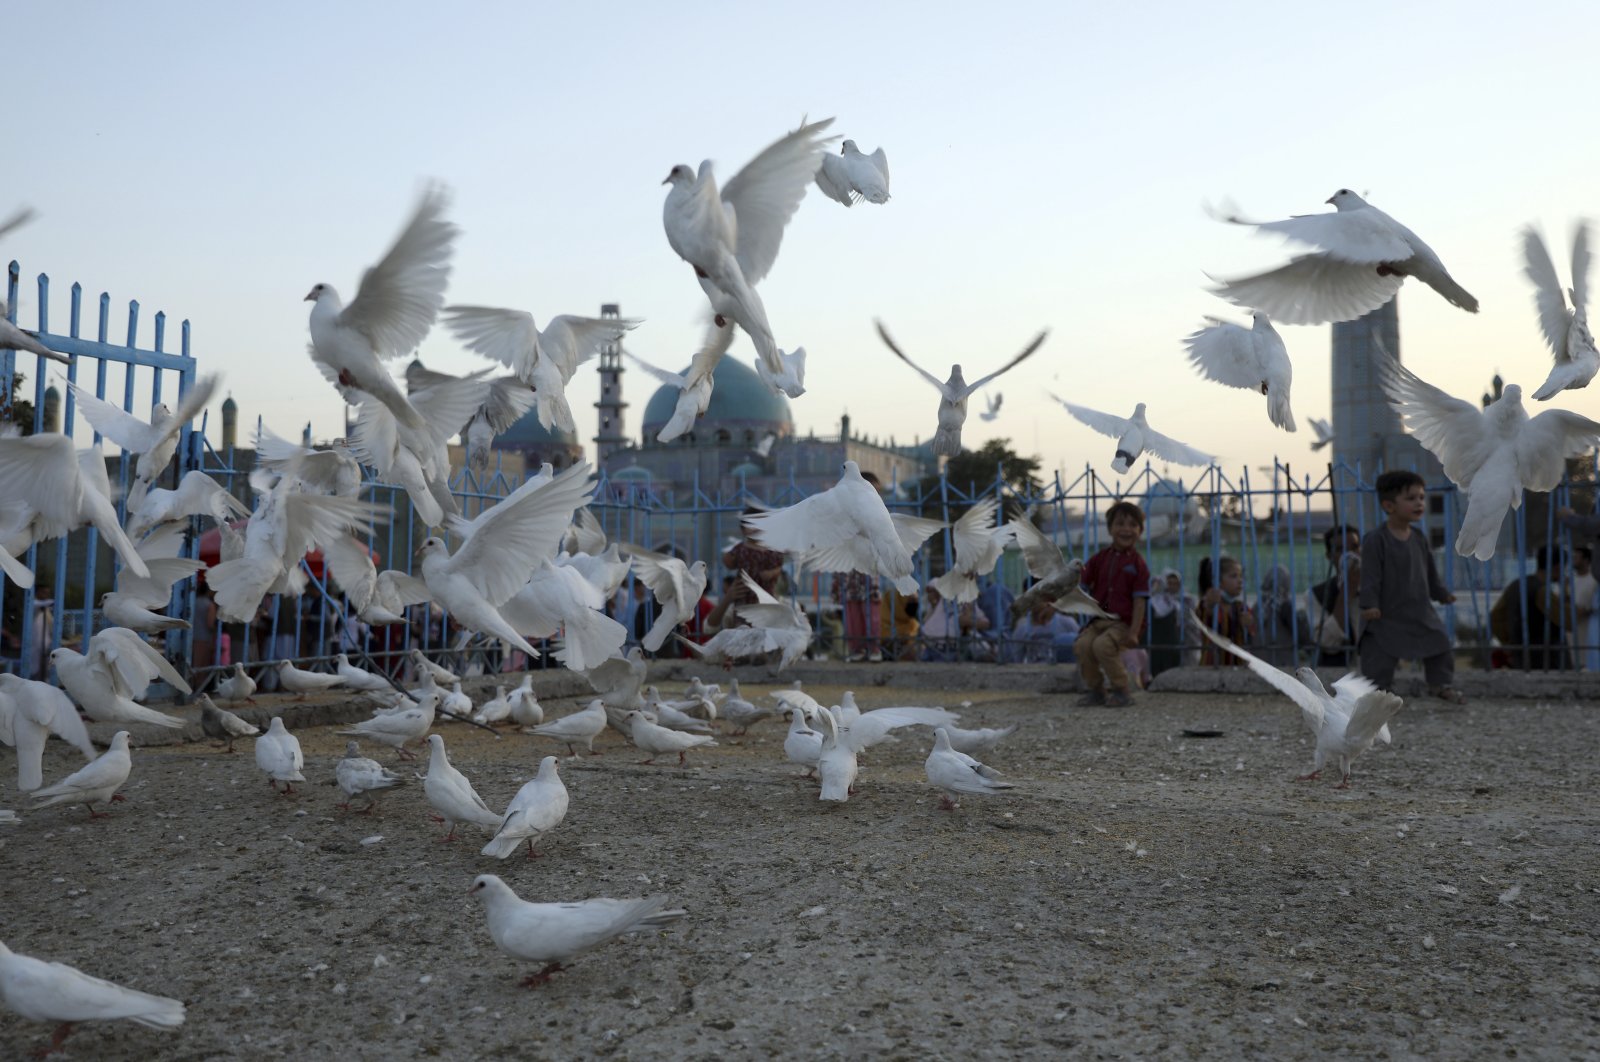 Afghan children play with pigeons in the courtyard of the Hazrat-e-Ali shrine, or Blue Mosque, in Mazar-e-Sharif, north of Kabul, Afghanistan, July 7, 2021. (AP Photo)